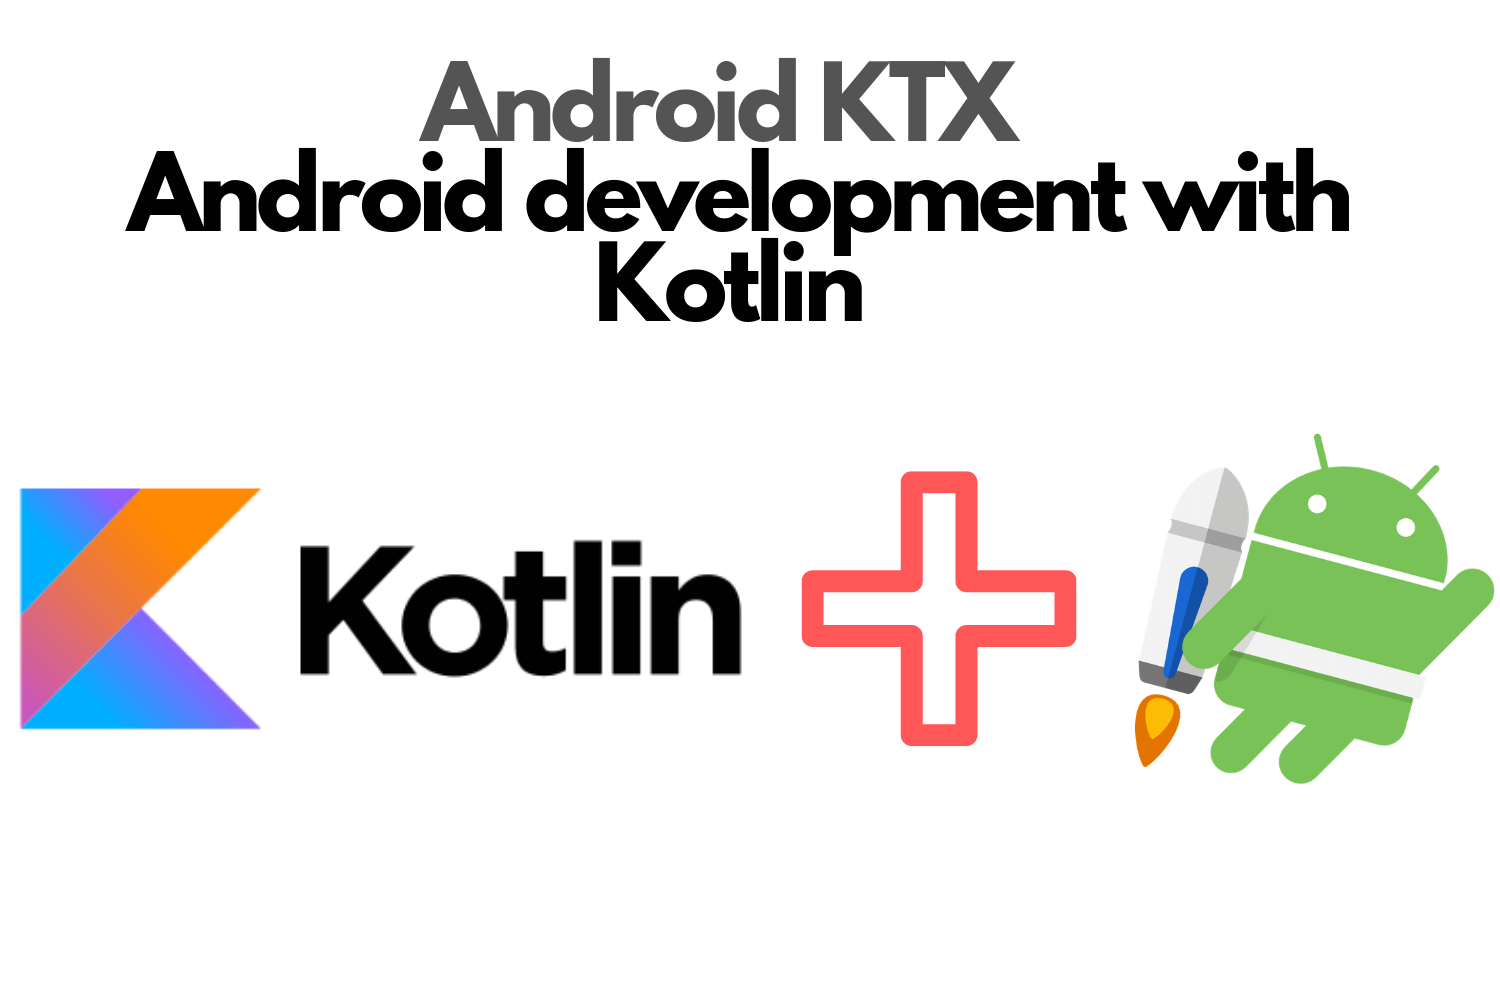 Android KTX - Android development with Kotlin